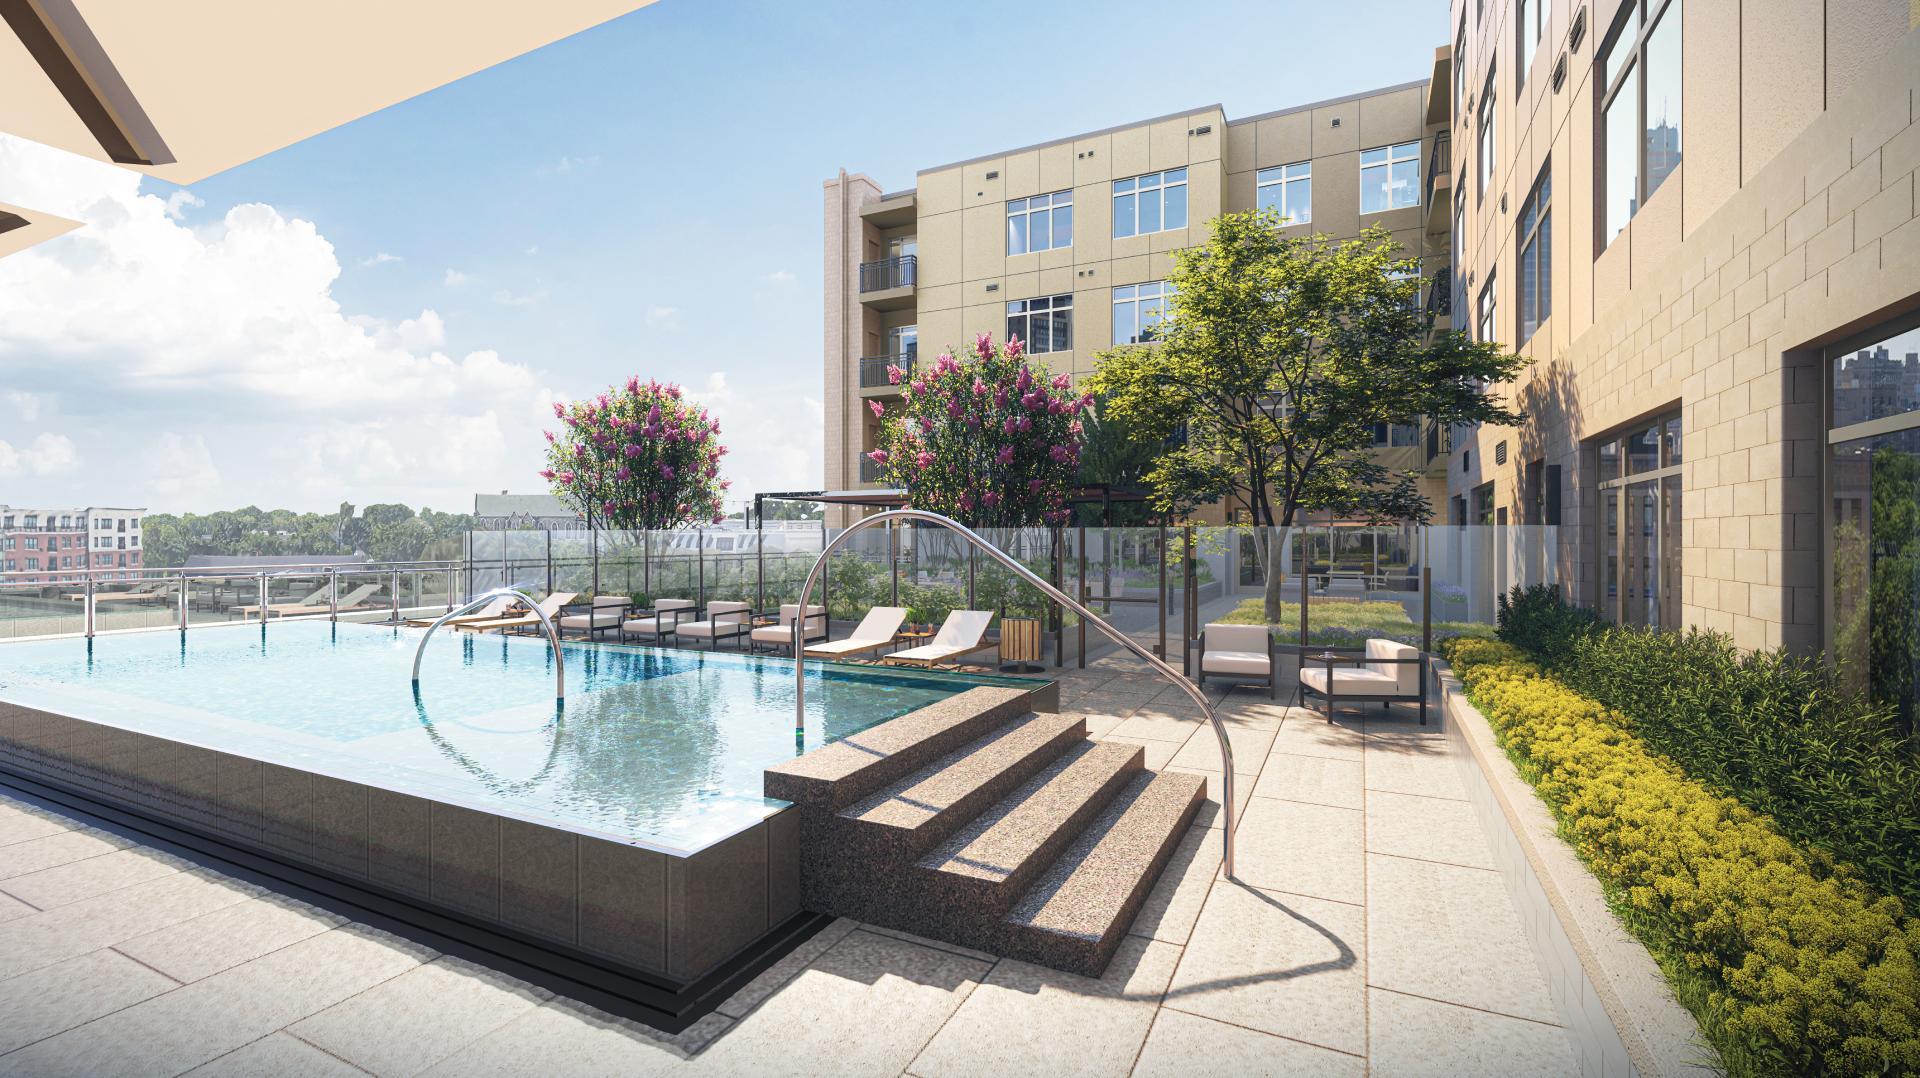 A rendering of a shimmering pool and lounge chairs in the active courtyard at Coulter Place